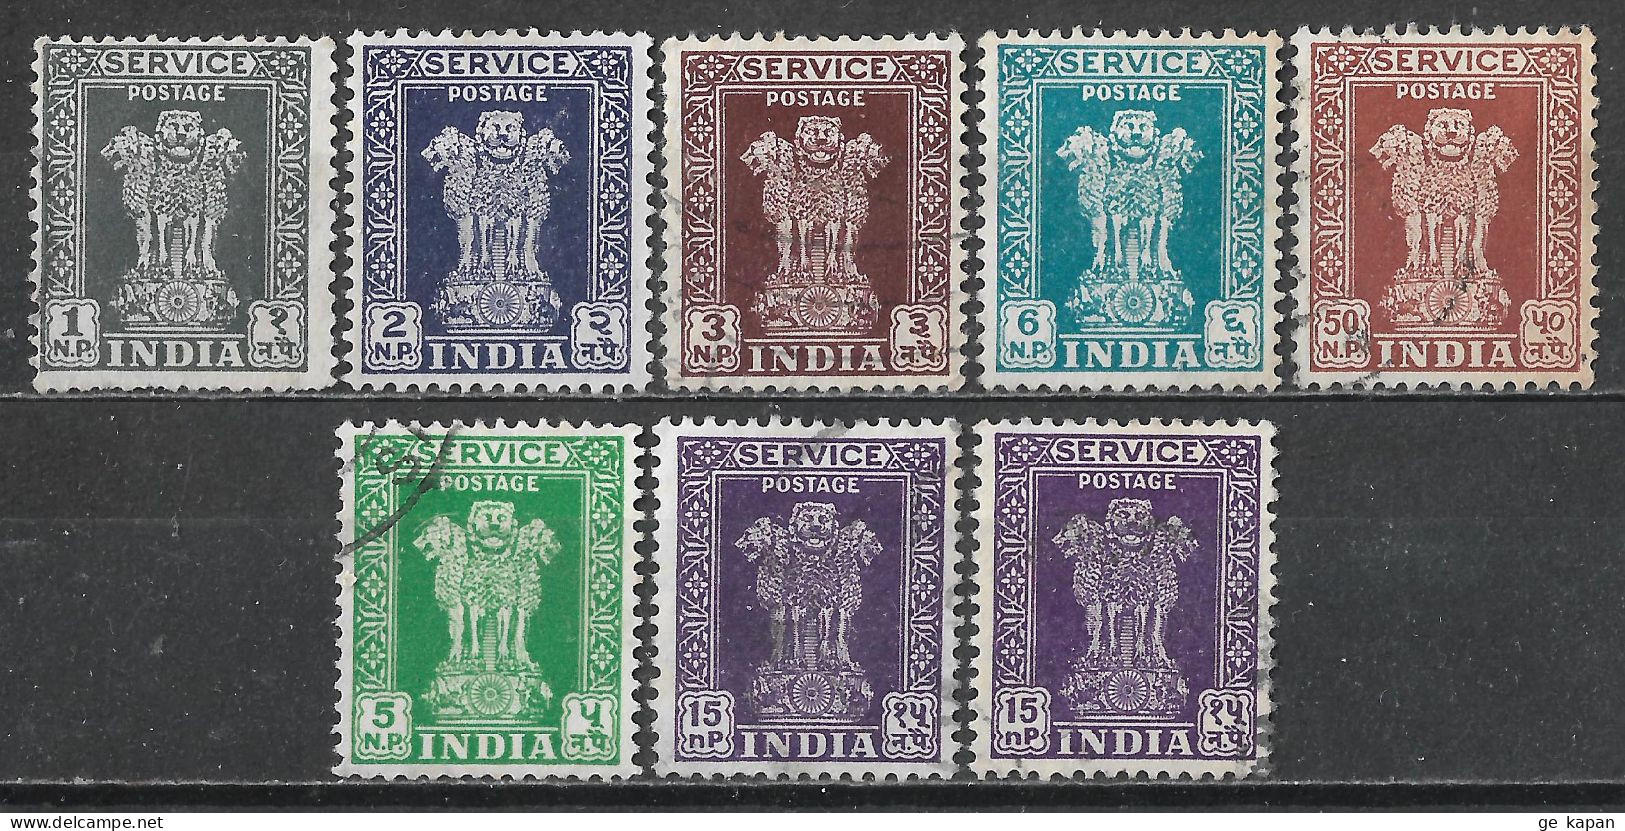 1957,1958 INDIA SET OF 8 OFFICIAL USED STAMPS (Michel # 131-133,135,140,144,148) - Timbres De Service